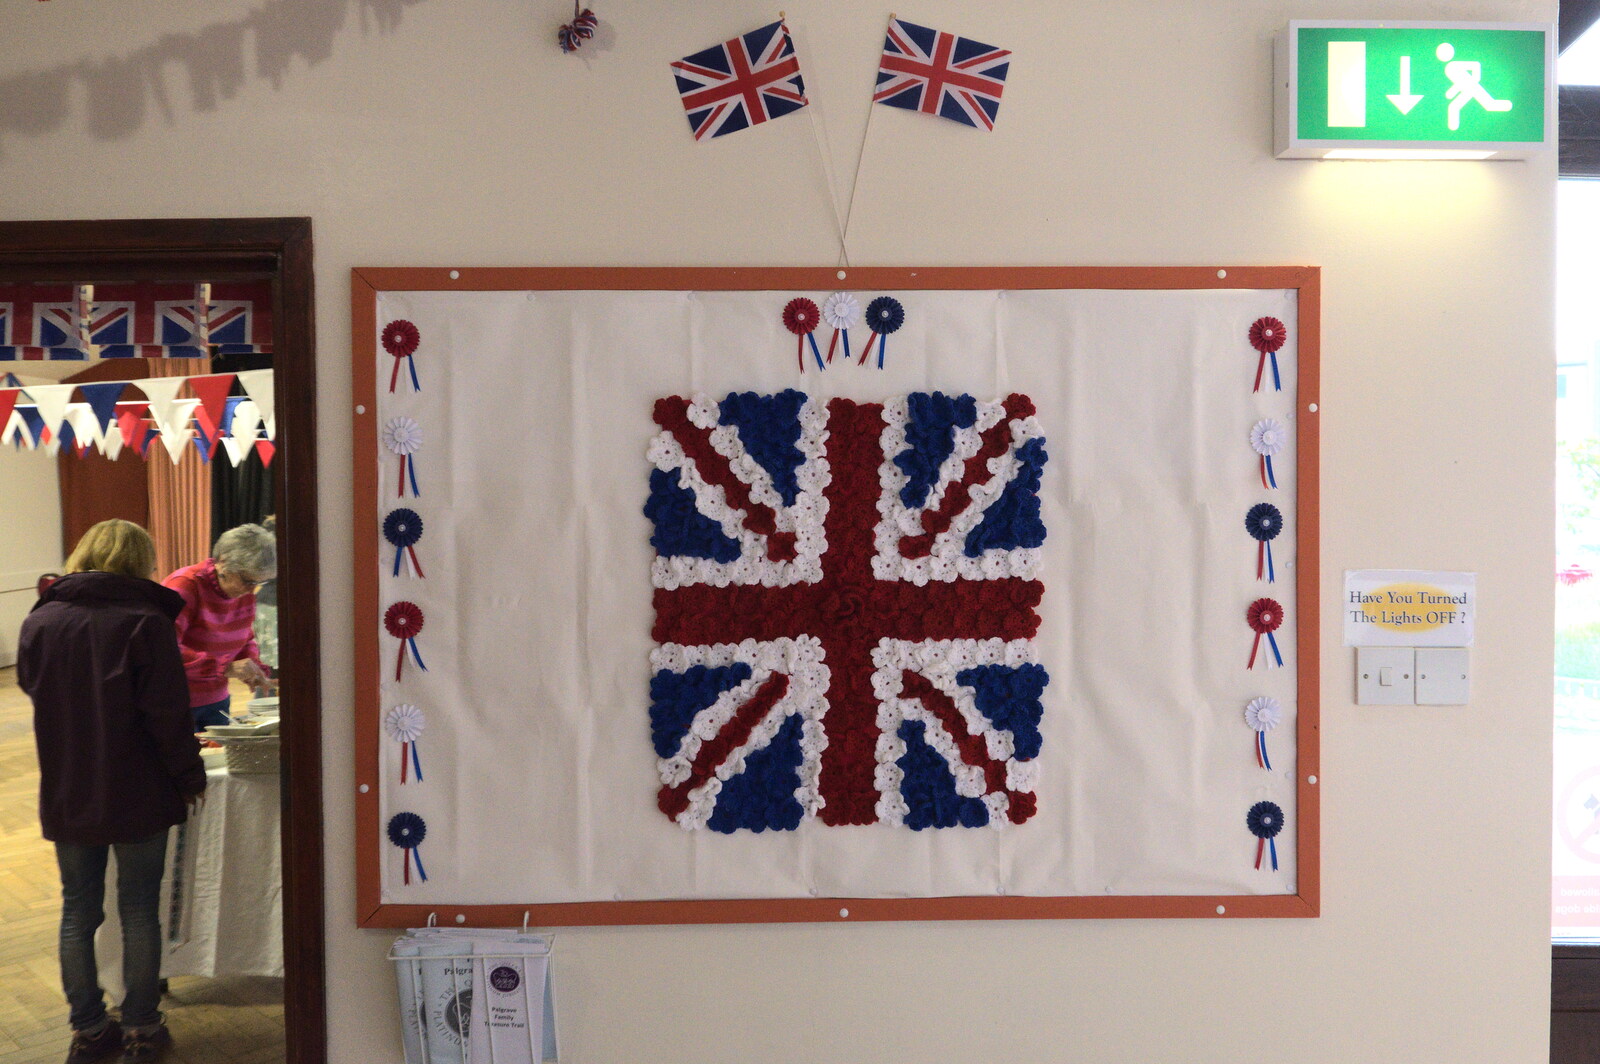 Platinum Jubilee Sunday in Palgrave, Brome and Coney Weston - 5th June 2022: A crocheted Union flag